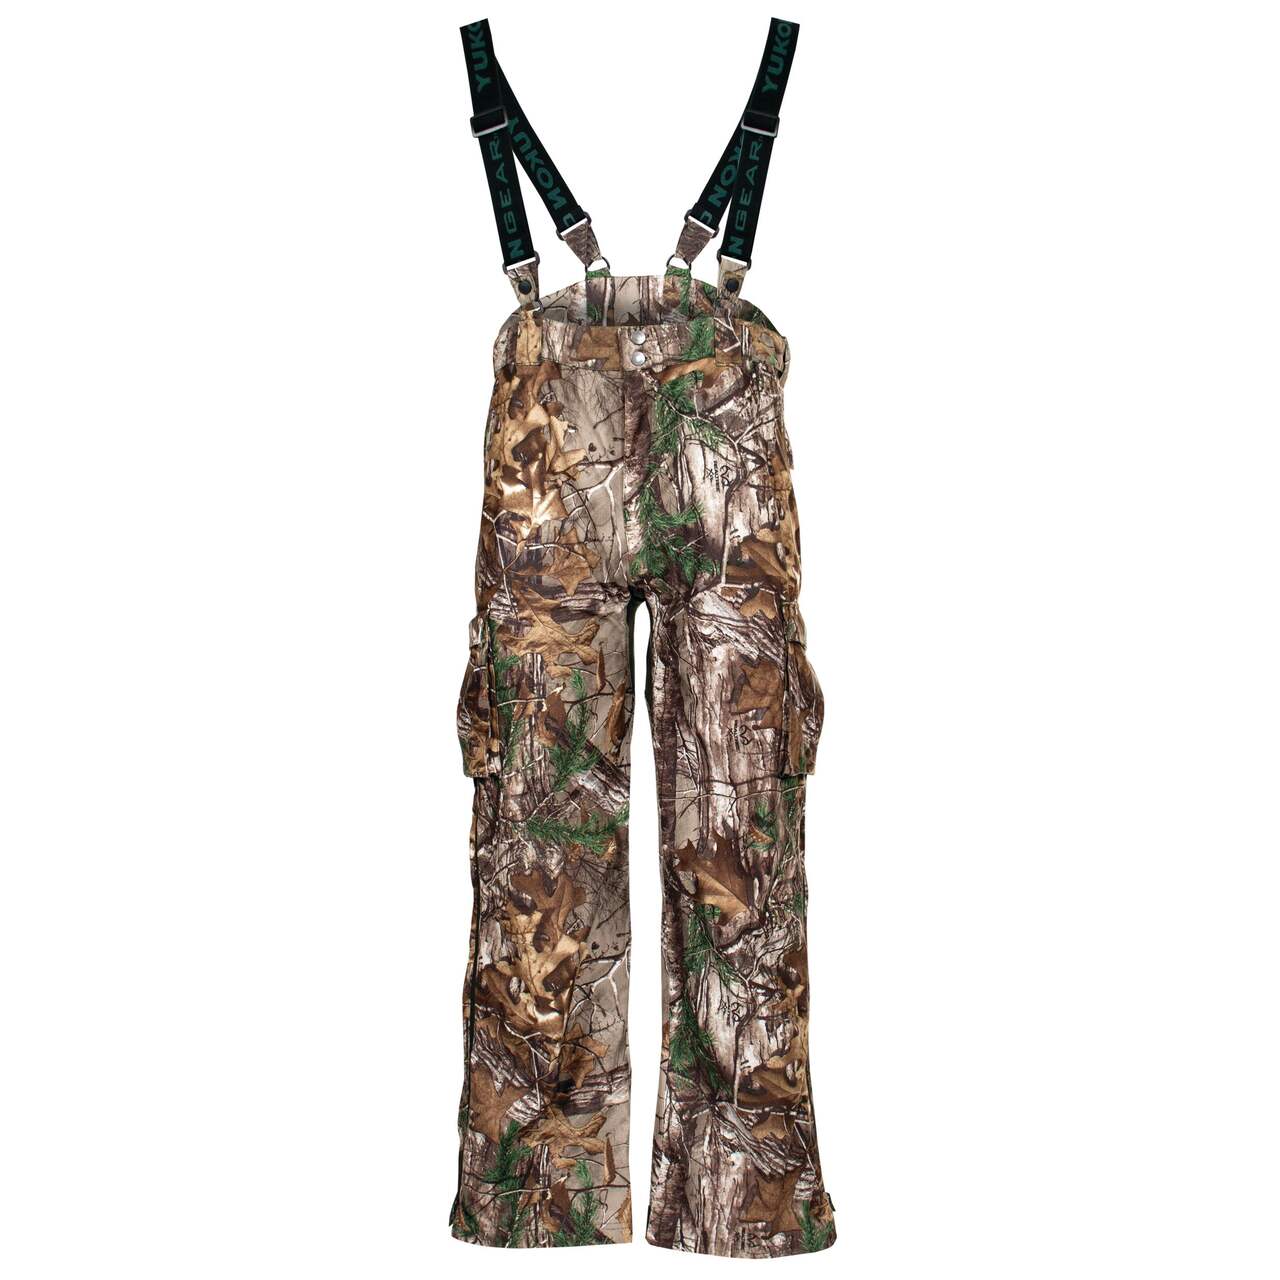 https://media-www.canadiantire.ca/product/playing/hunting/hunting-apparel-footwear/1759644/mens-lightweight-pant-m-23a4fbe4-4690-417a-b4dc-f233edfd858a-jpgrendition.jpg?imdensity=1&imwidth=640&impolicy=mZoom